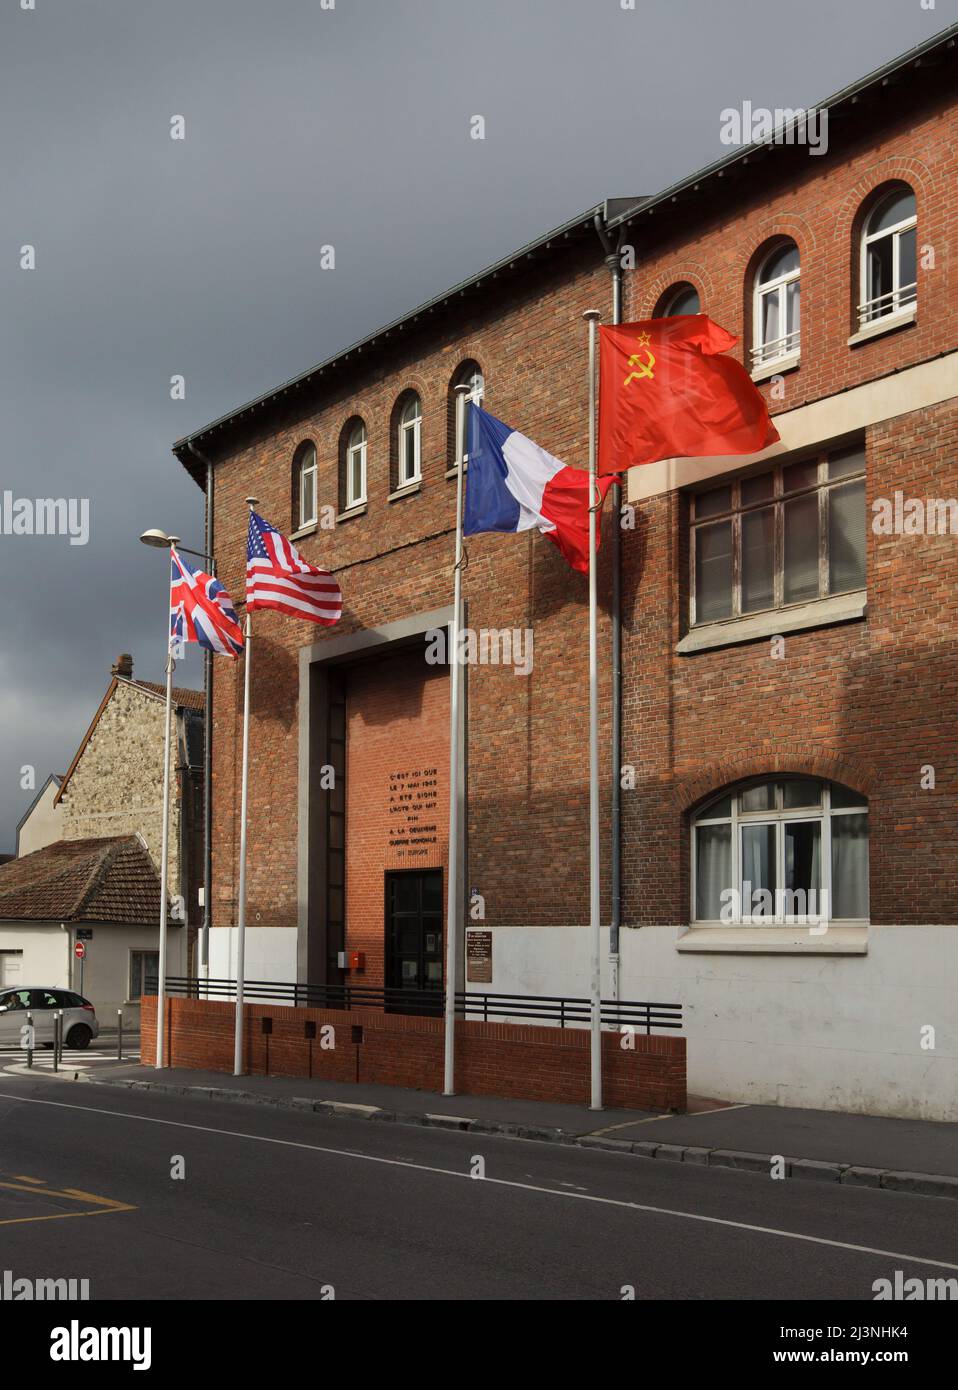 National flags of the United Kingdom, the United States of America, France and the Soviet Union wave at the entrance to the Museum of the Surrender (Musée de la Reddition) in Reims, France. The first German Instrument of Surrender that ended World War II in Europe was signed in this building at 02:41 Central European Time (CET) on 7 May 1945. Stock Photo